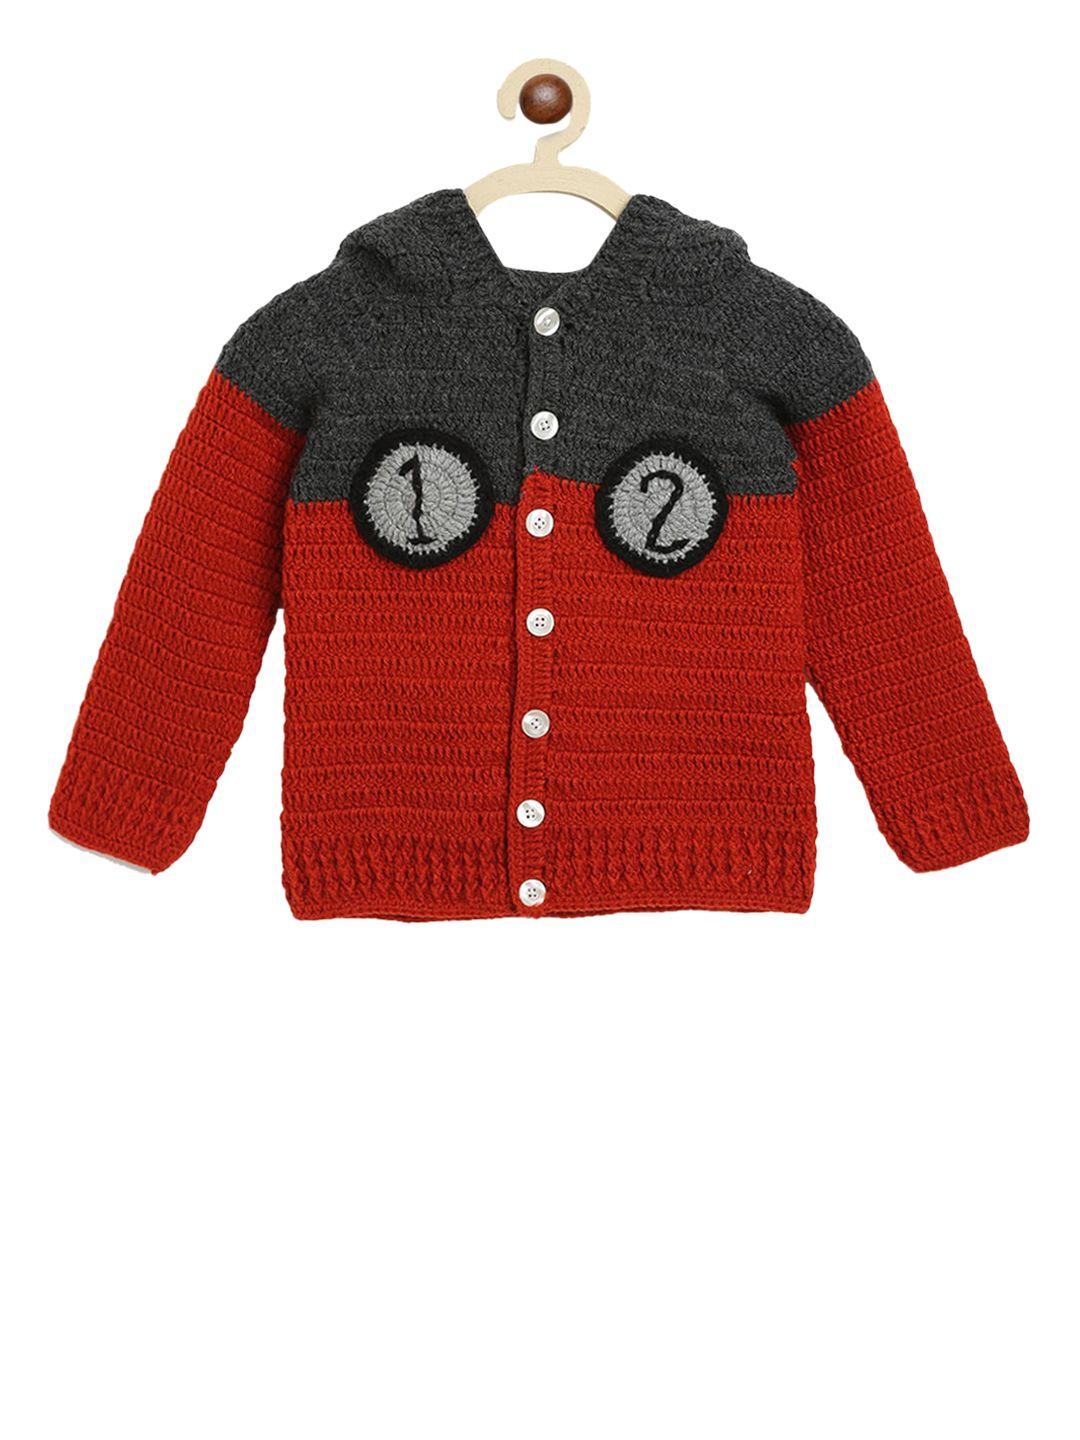 chutput kids red colourblocked front-open hand-knitted crochet hooded sweater